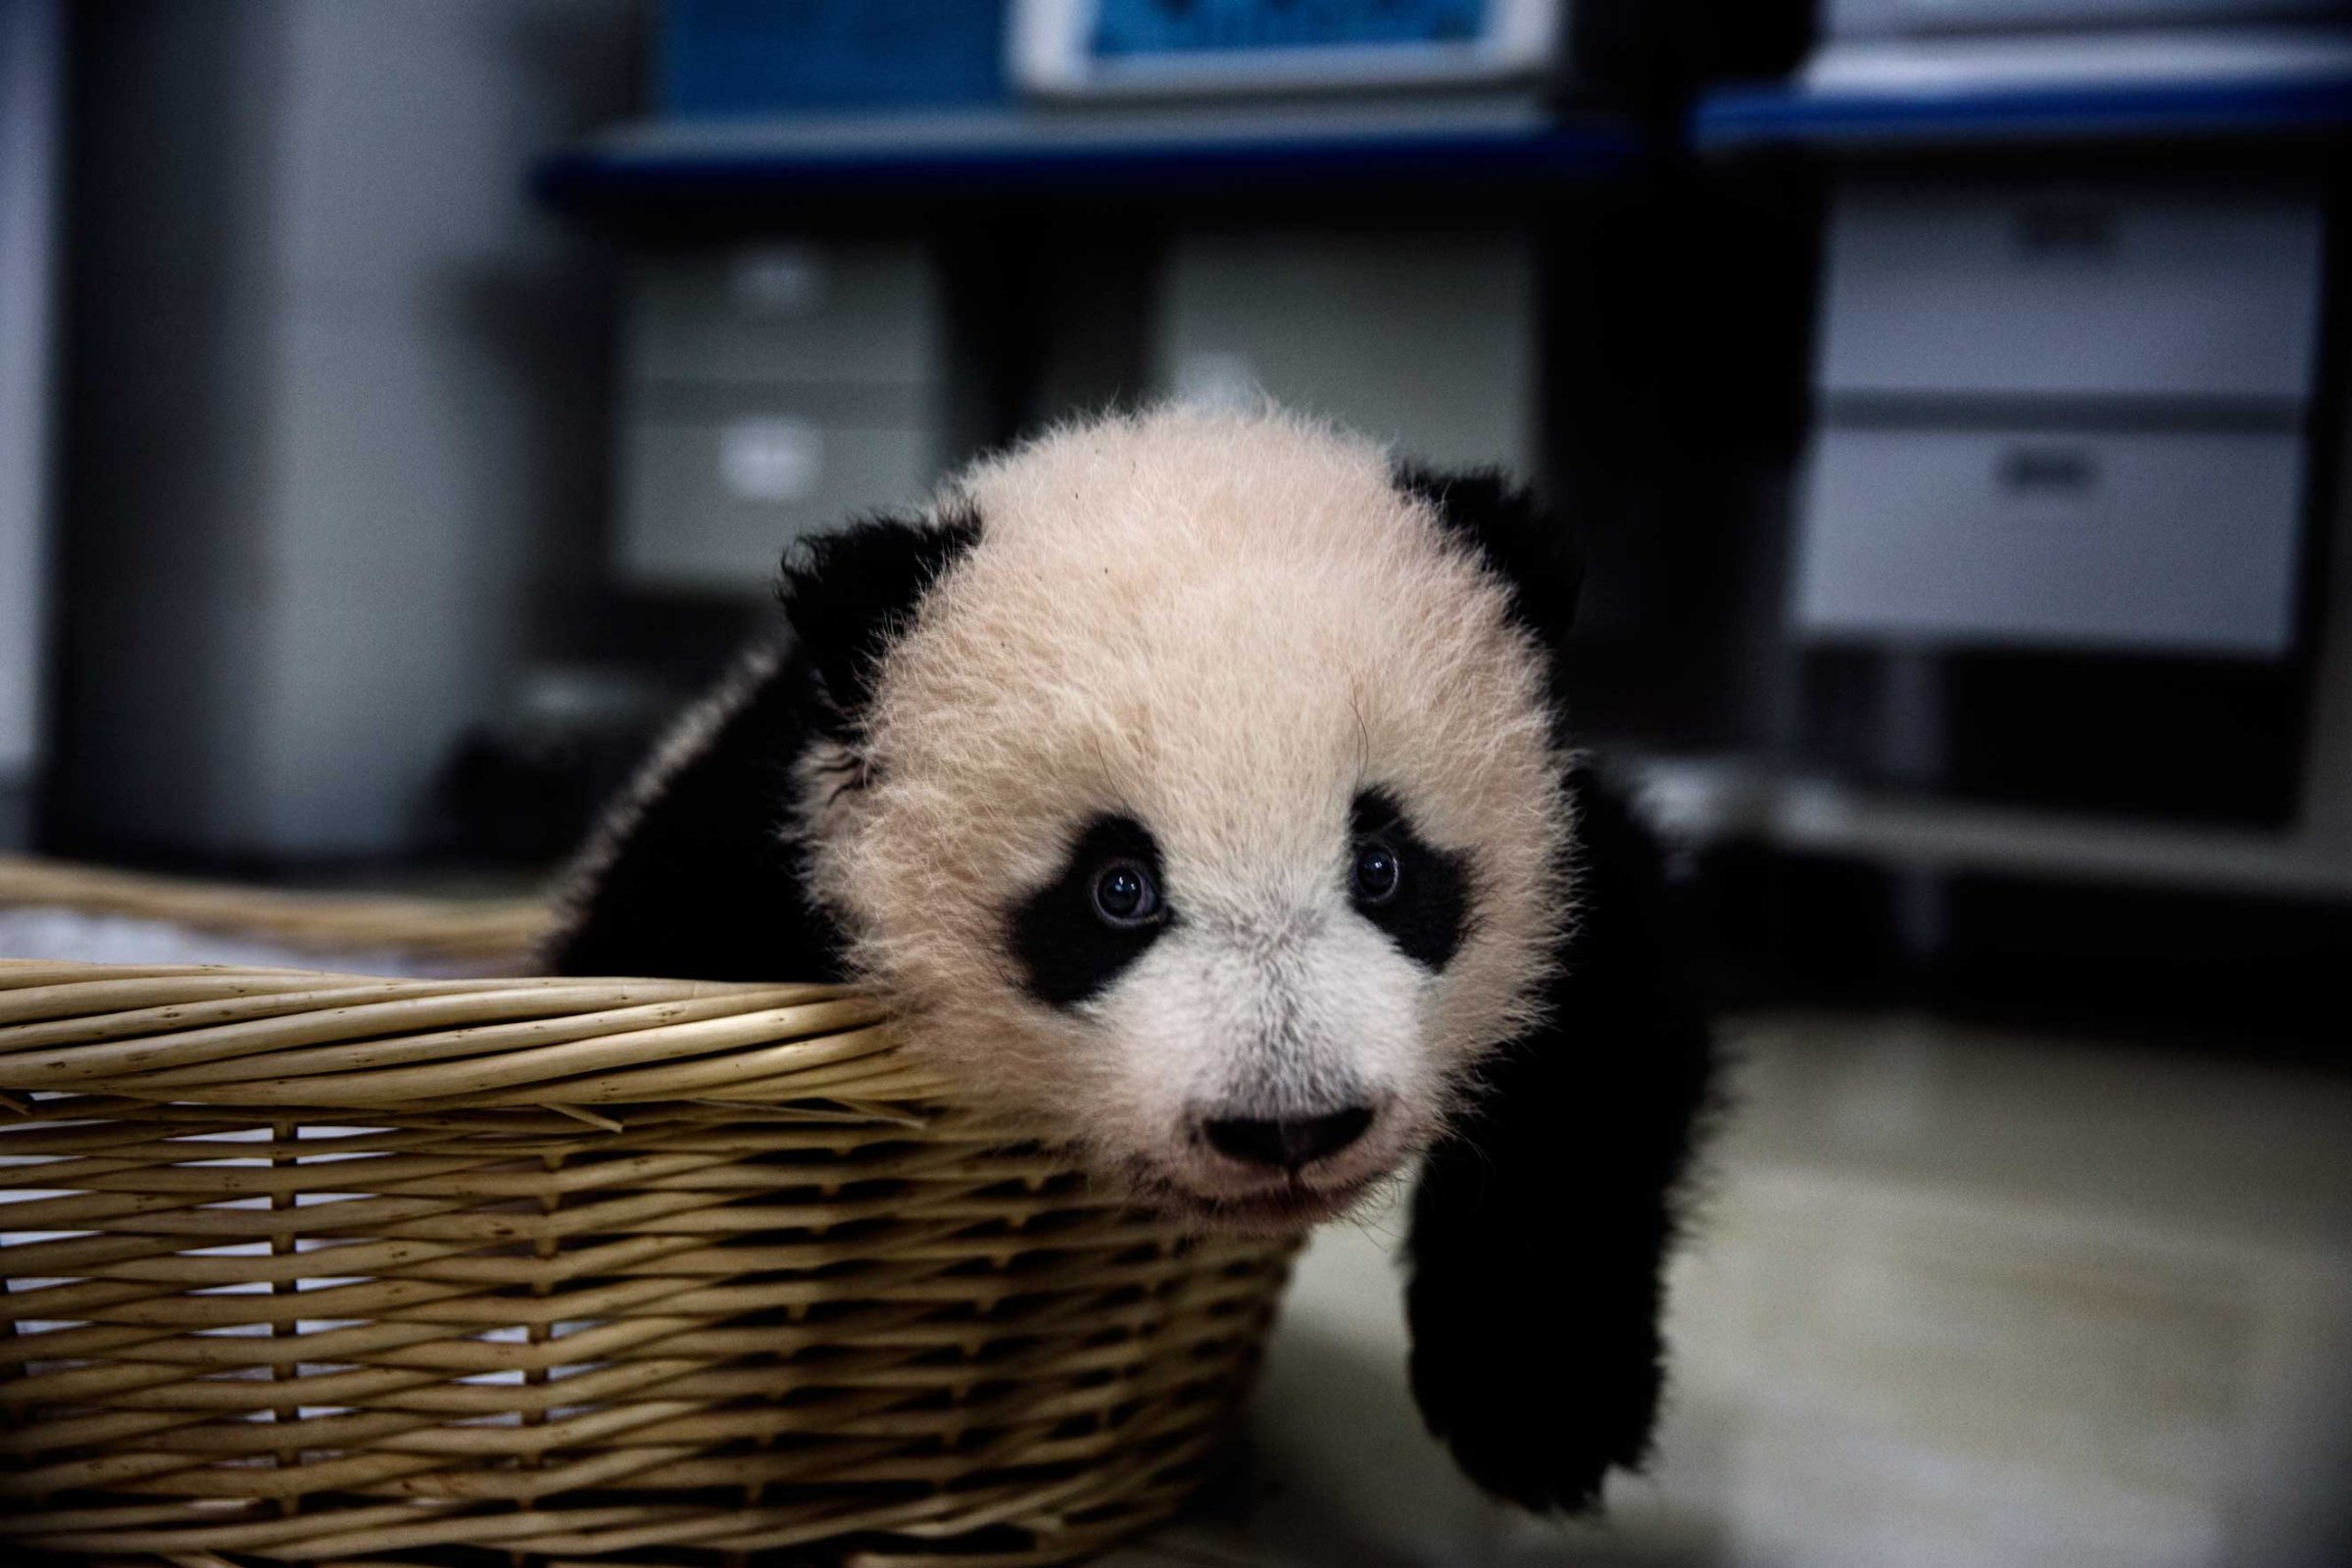 A baby panda rests after feeding time in the nursery at the Bifengxia Panda Base in Ya’an, Sichuan Province, China, Dec. 3, 2015.